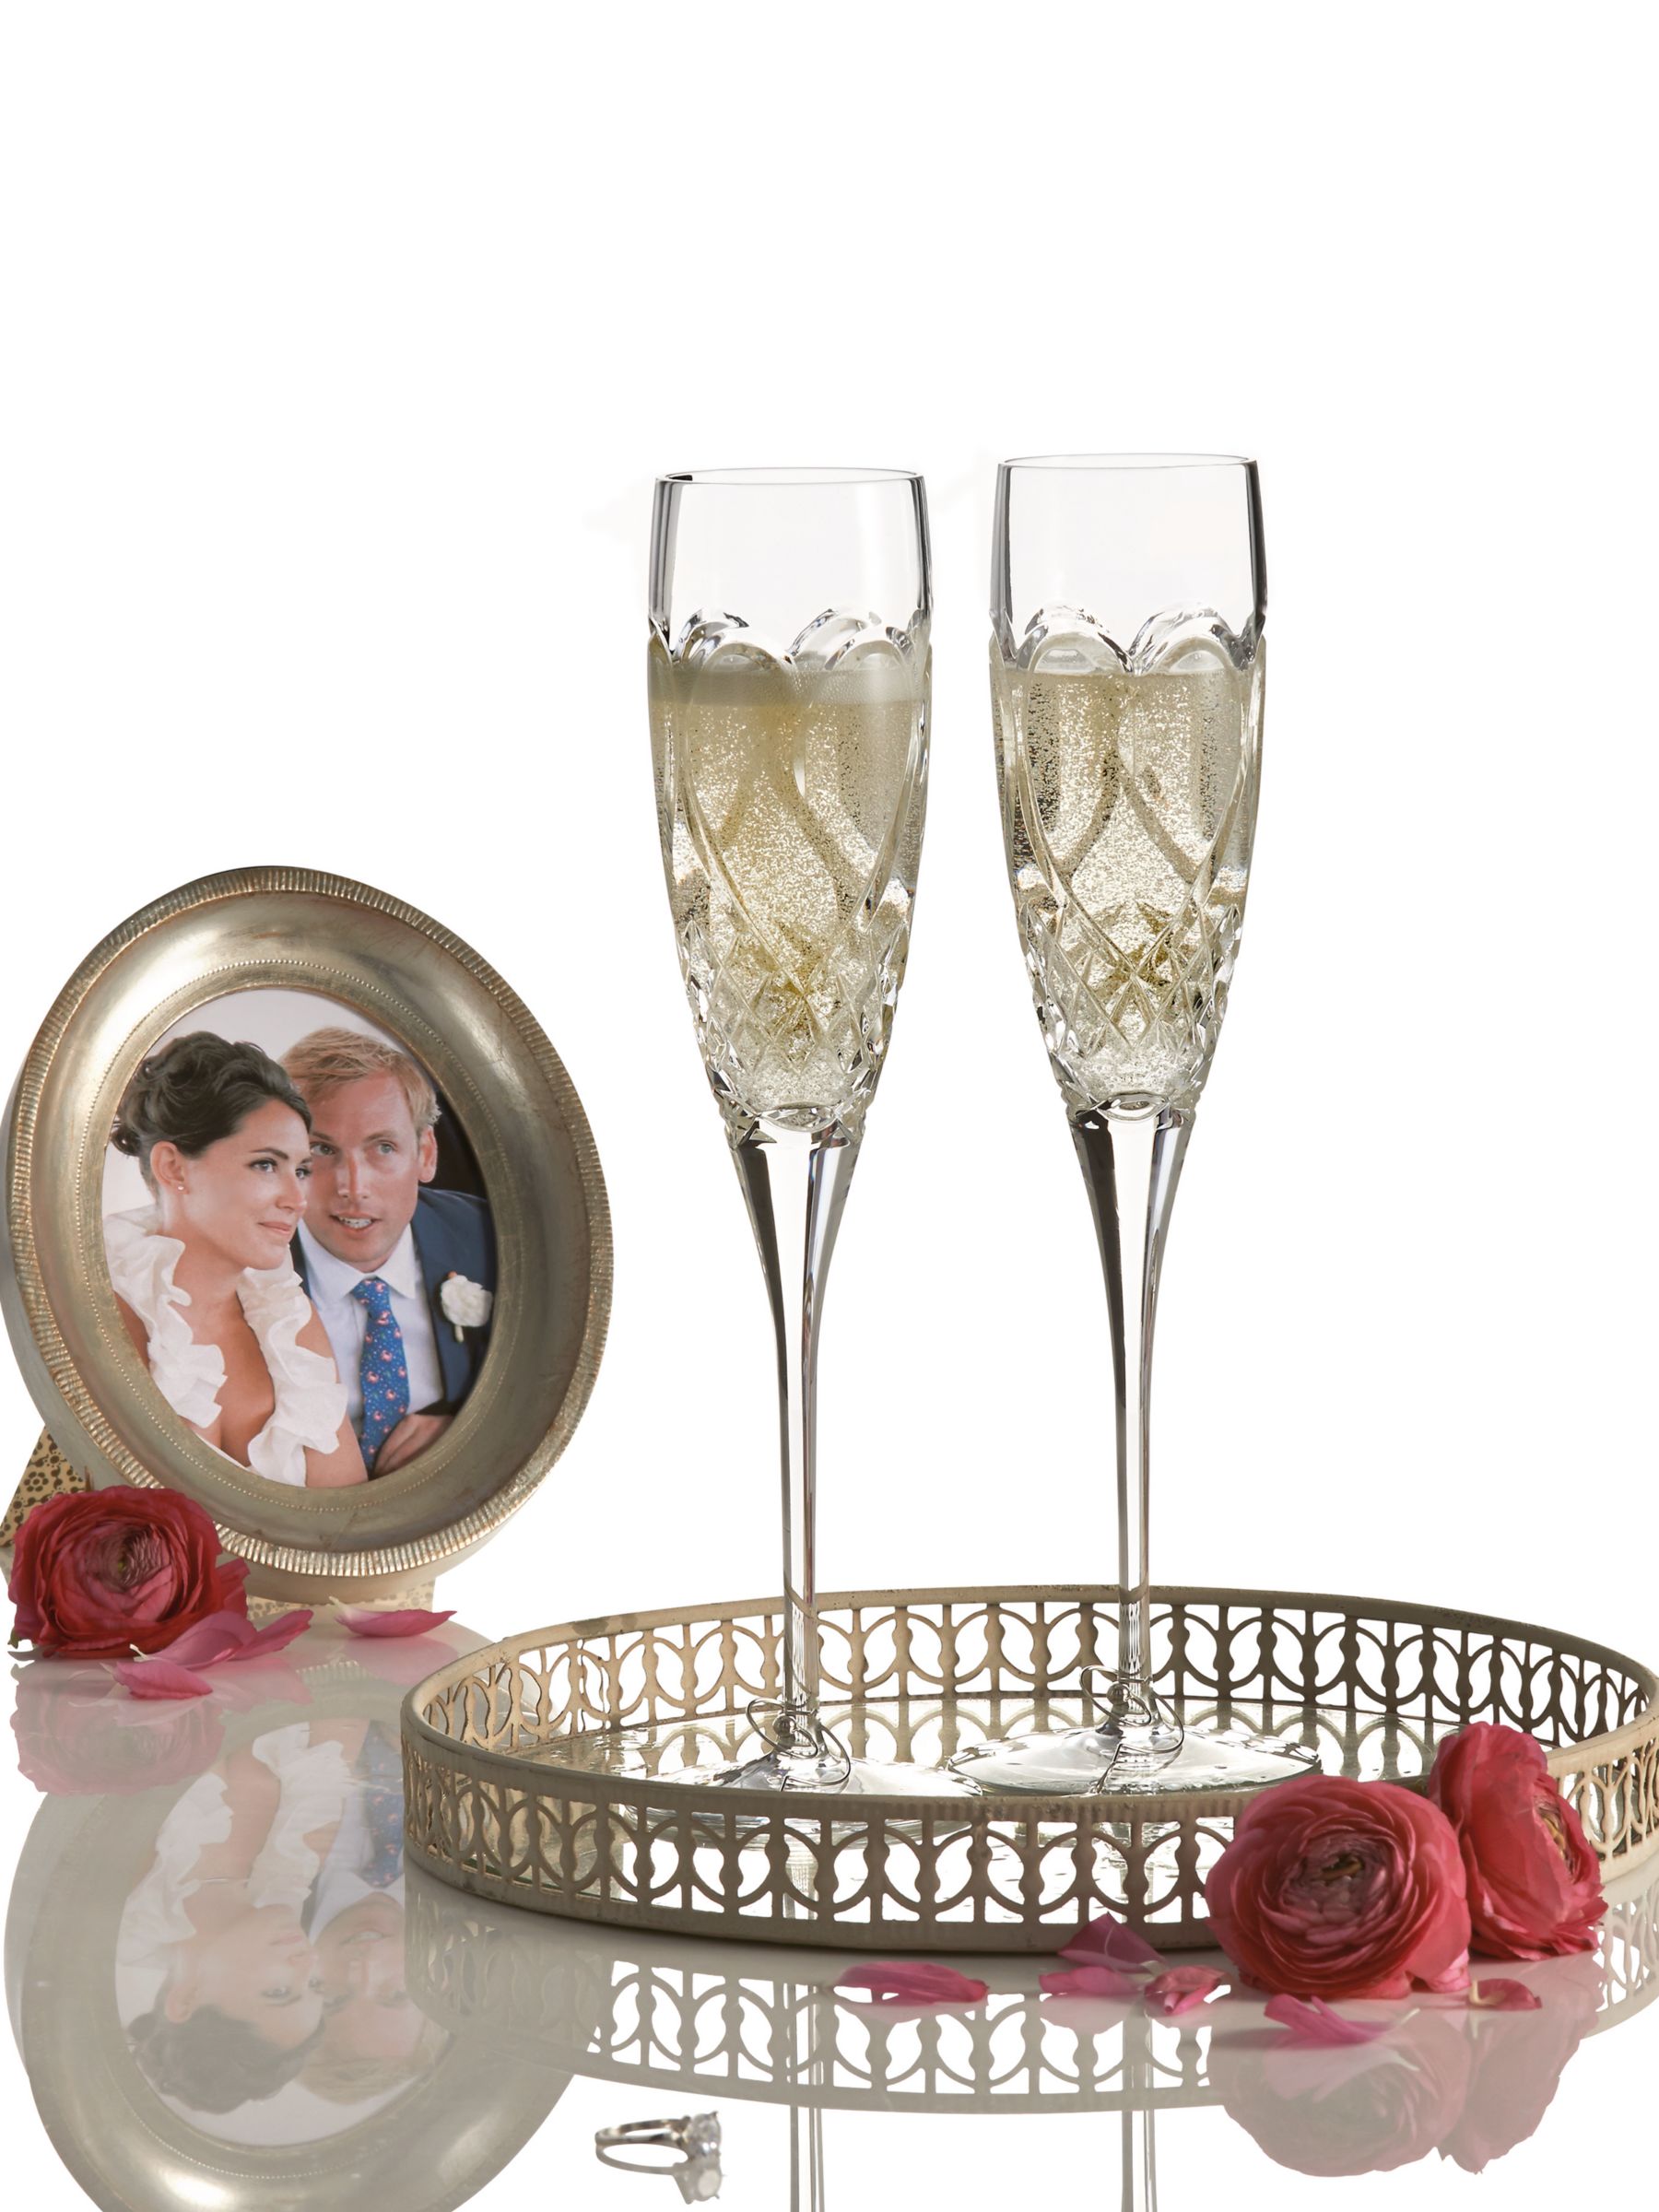 Waterford Crystal Toasting Champagne Flutes Heirloom Wedding Hearts glasses  - 2